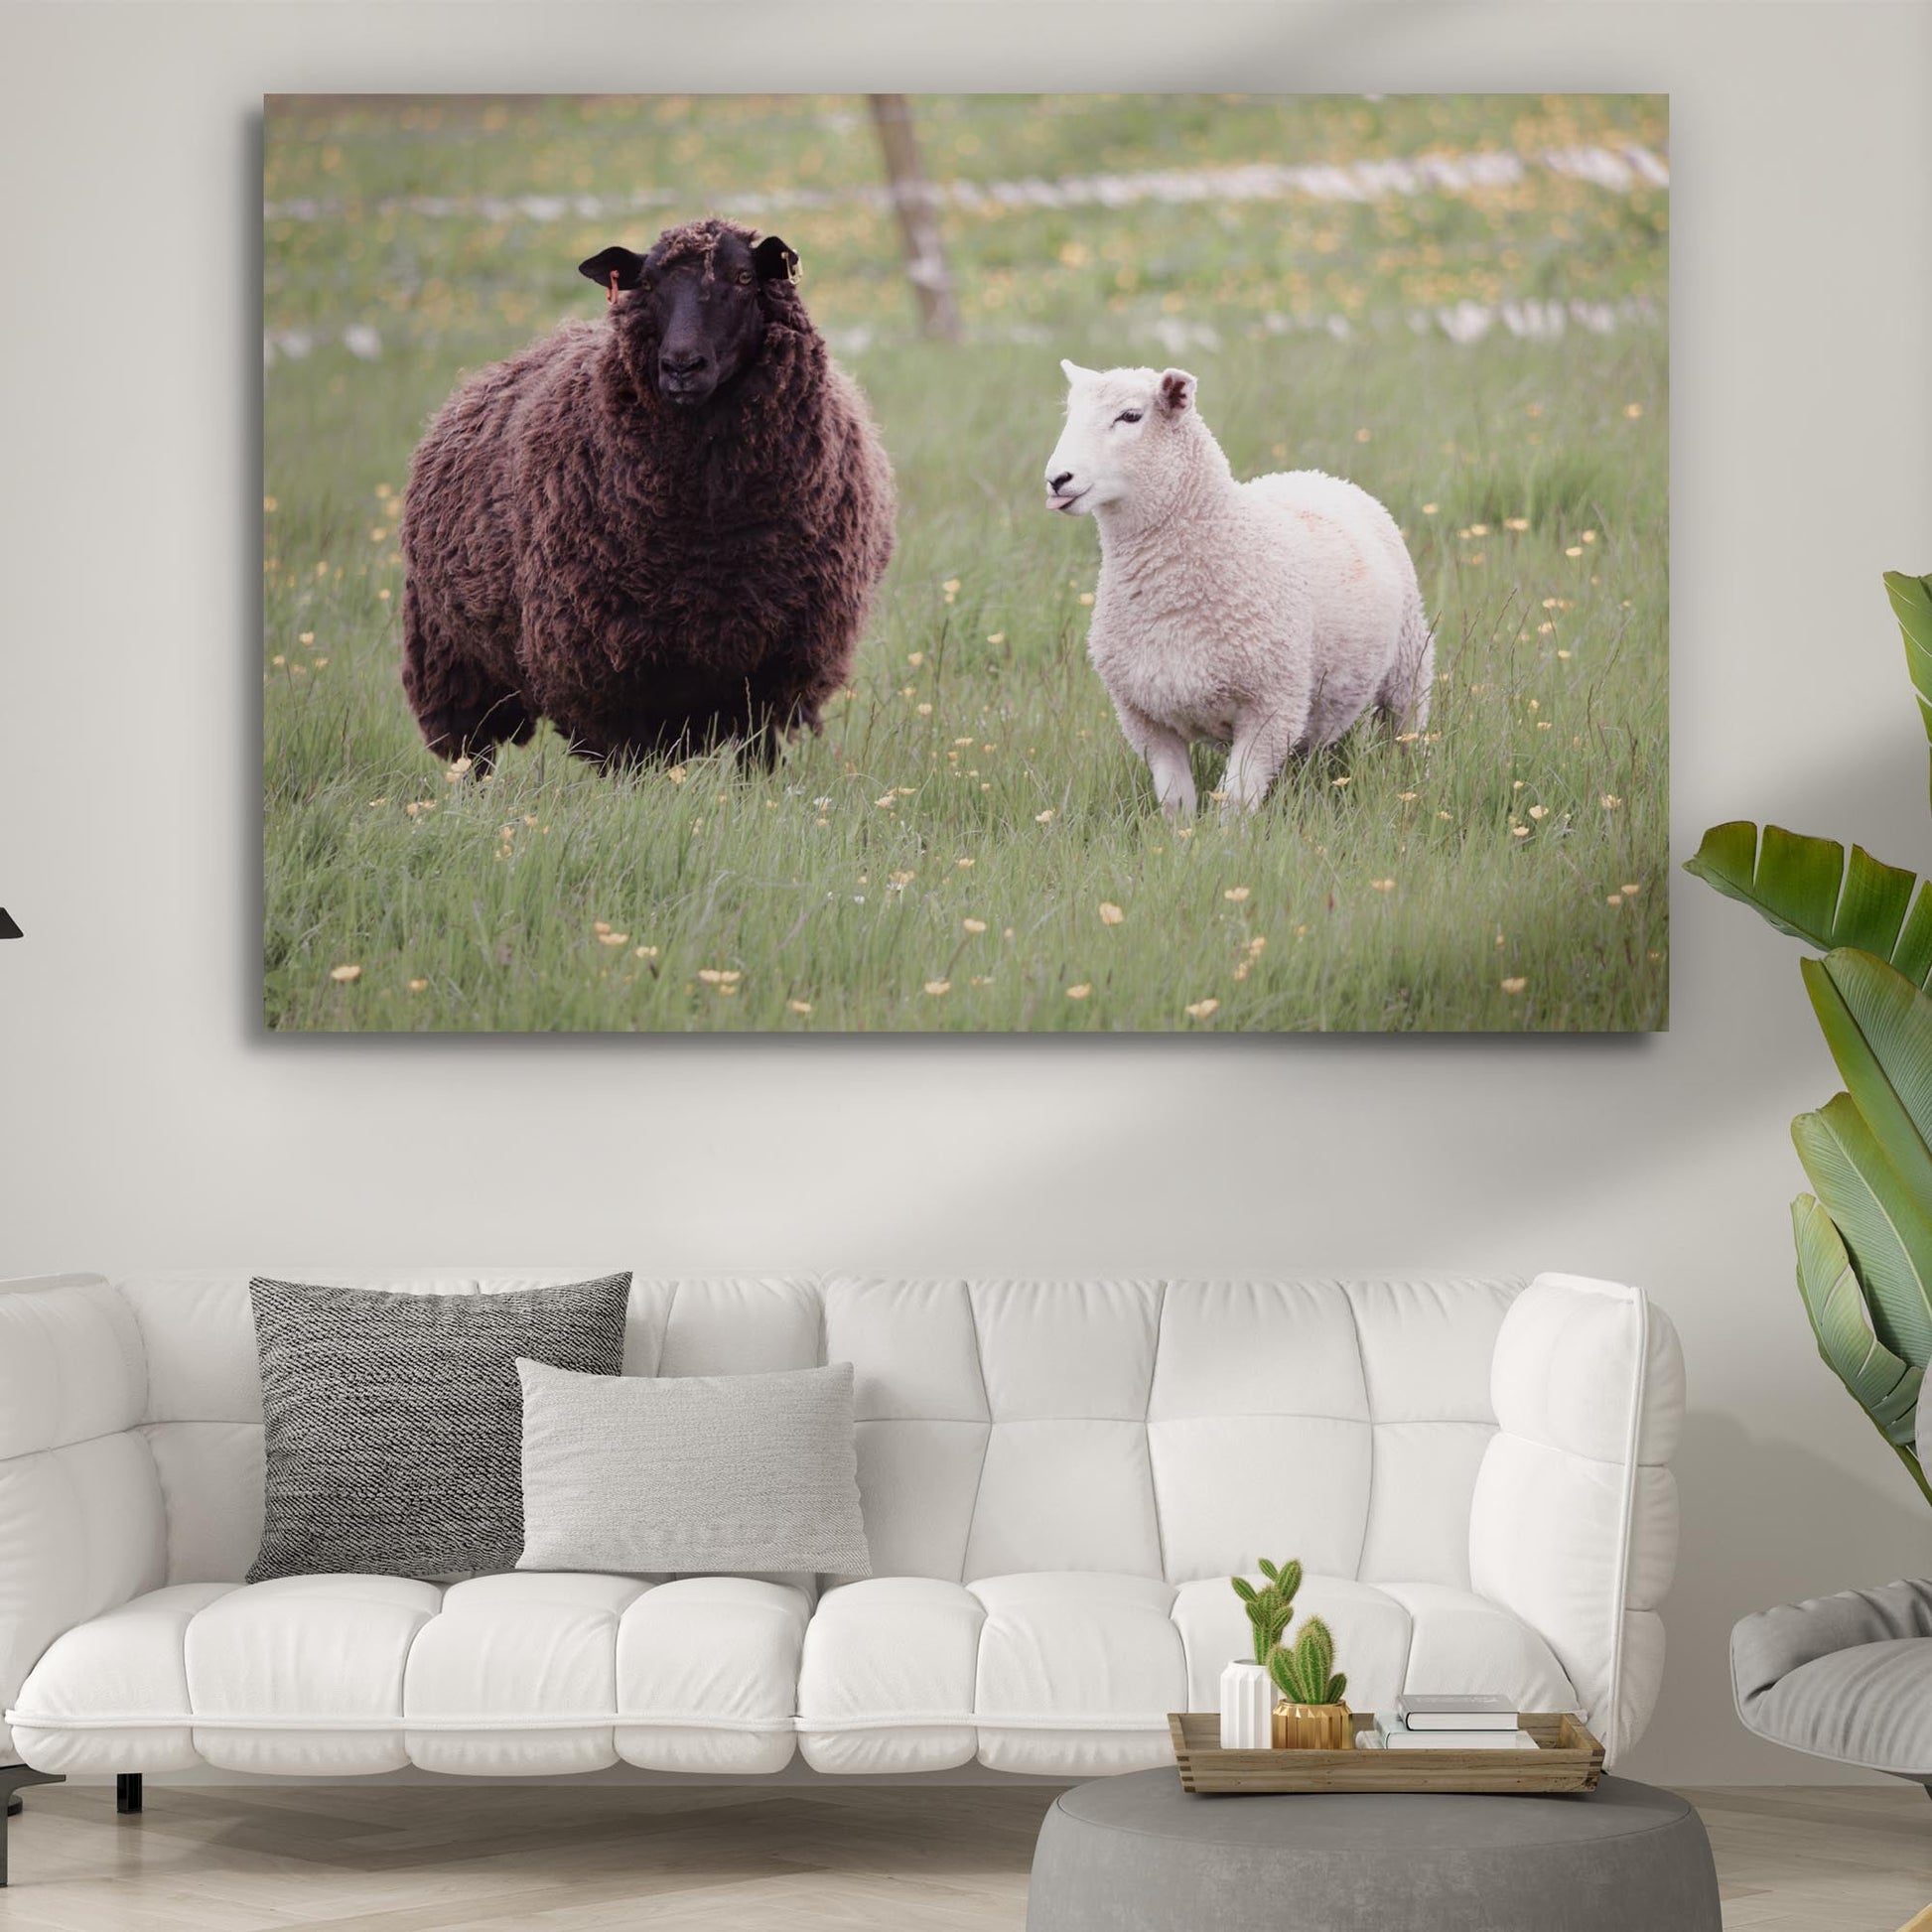 Hello Dally The Sheep Canvas Wall Art Style 2 - Image by Tailored Canvases